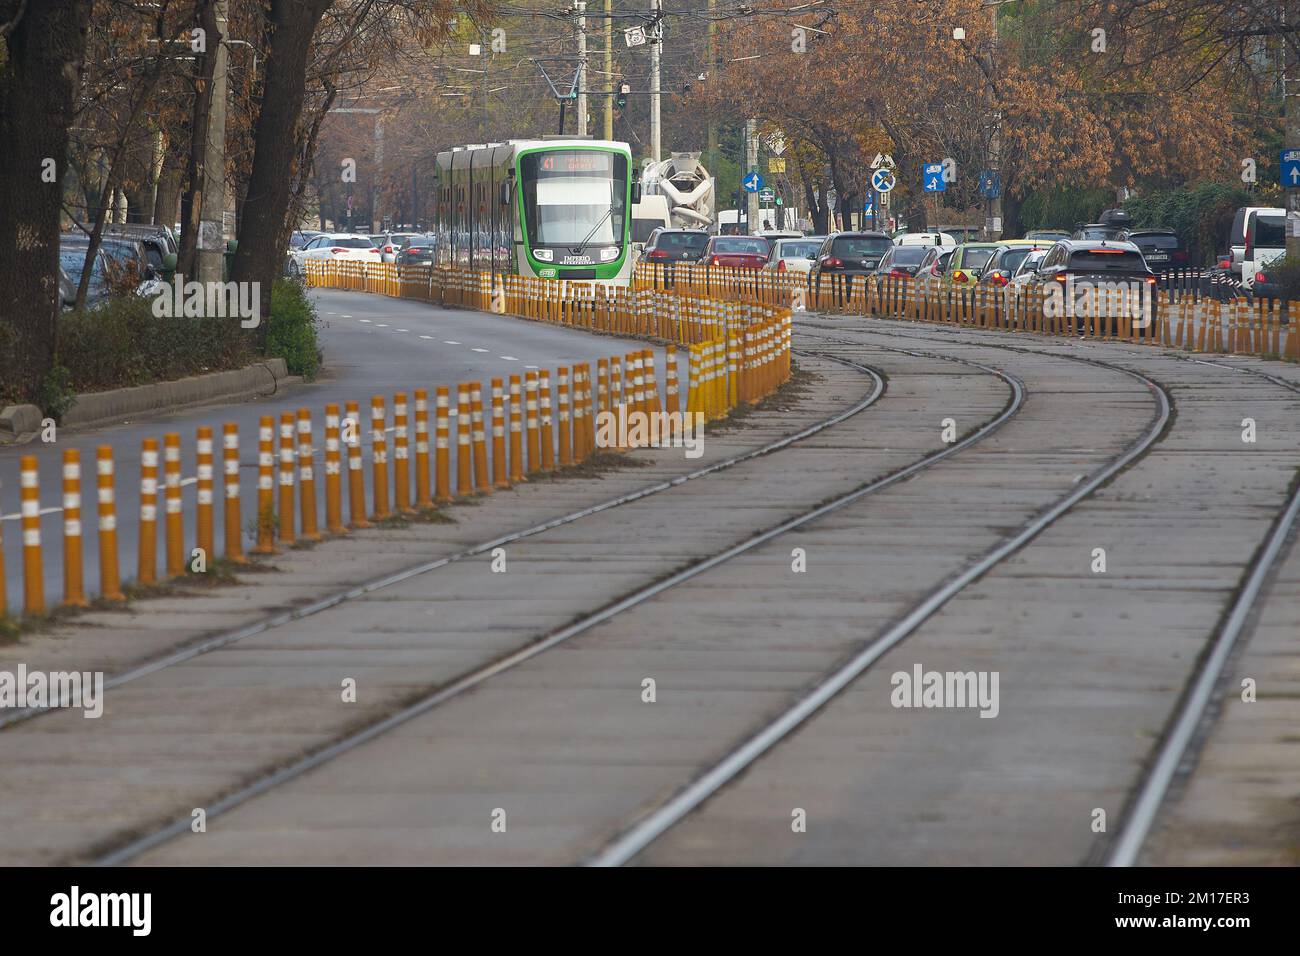 Bucharest, Romania - December 10, 2022: ASTRA Imperio Metropolitan, Romanian double articulated tram with low floor and high transport capacity, runs Stock Photo